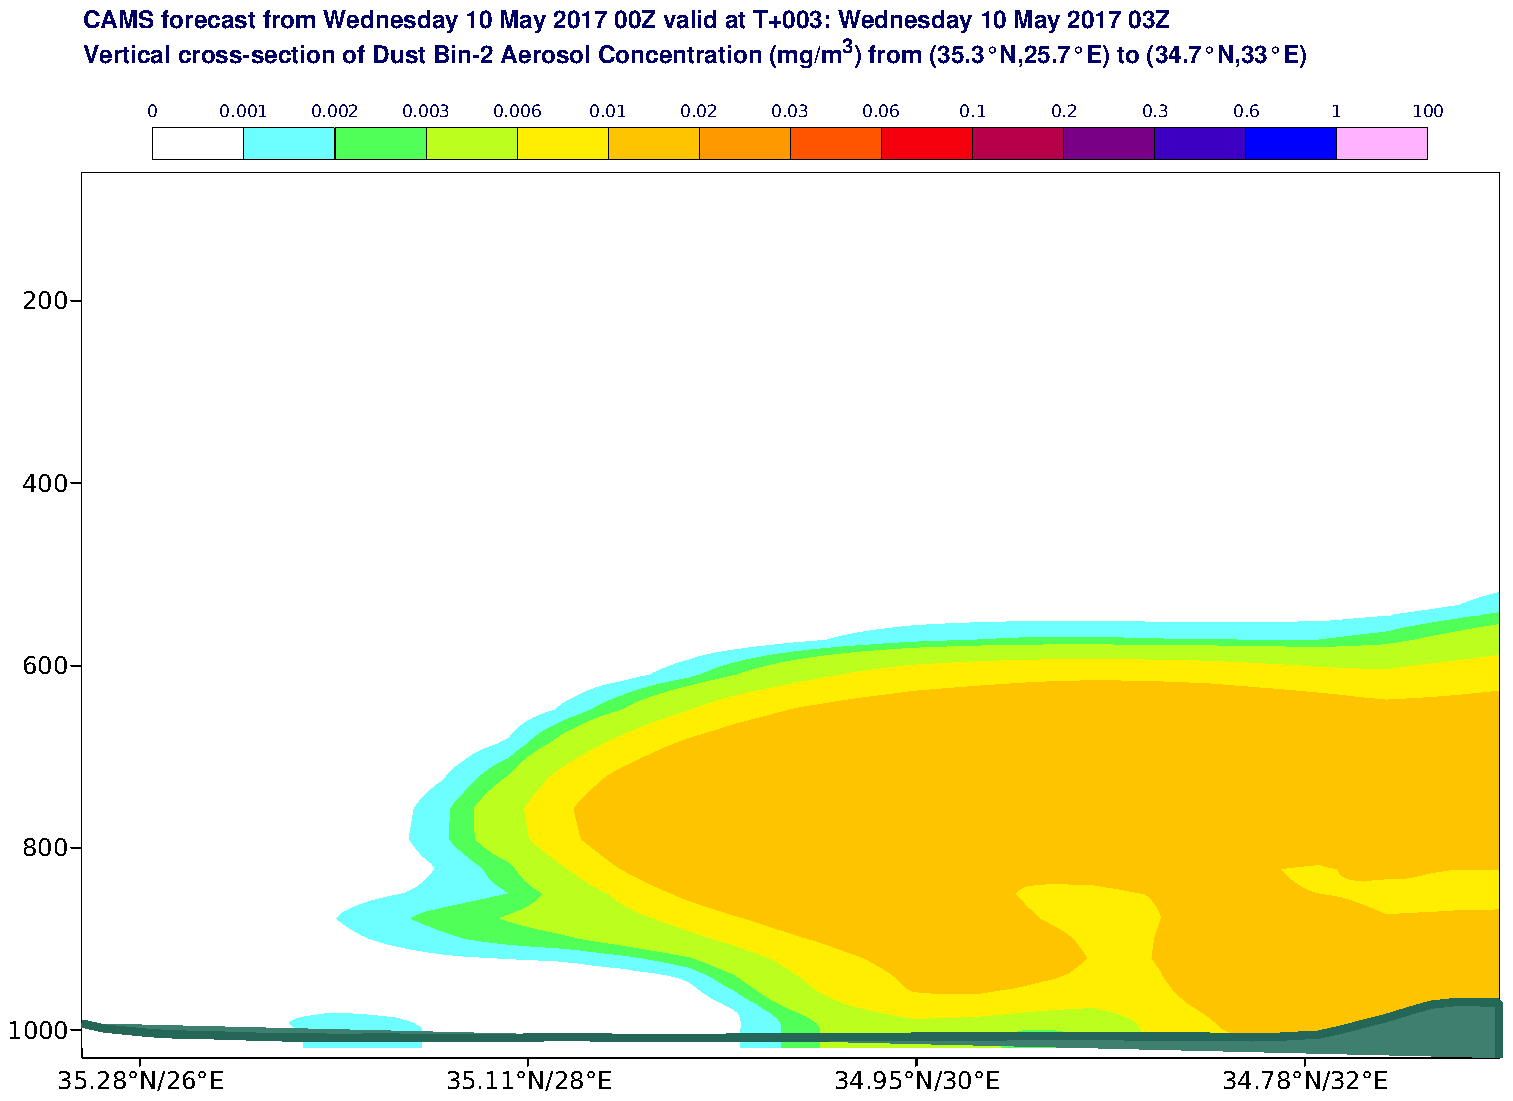 Vertical cross-section of Dust Bin-2 Aerosol Concentration (mg/m3) valid at T3 - 2017-05-10 03:00